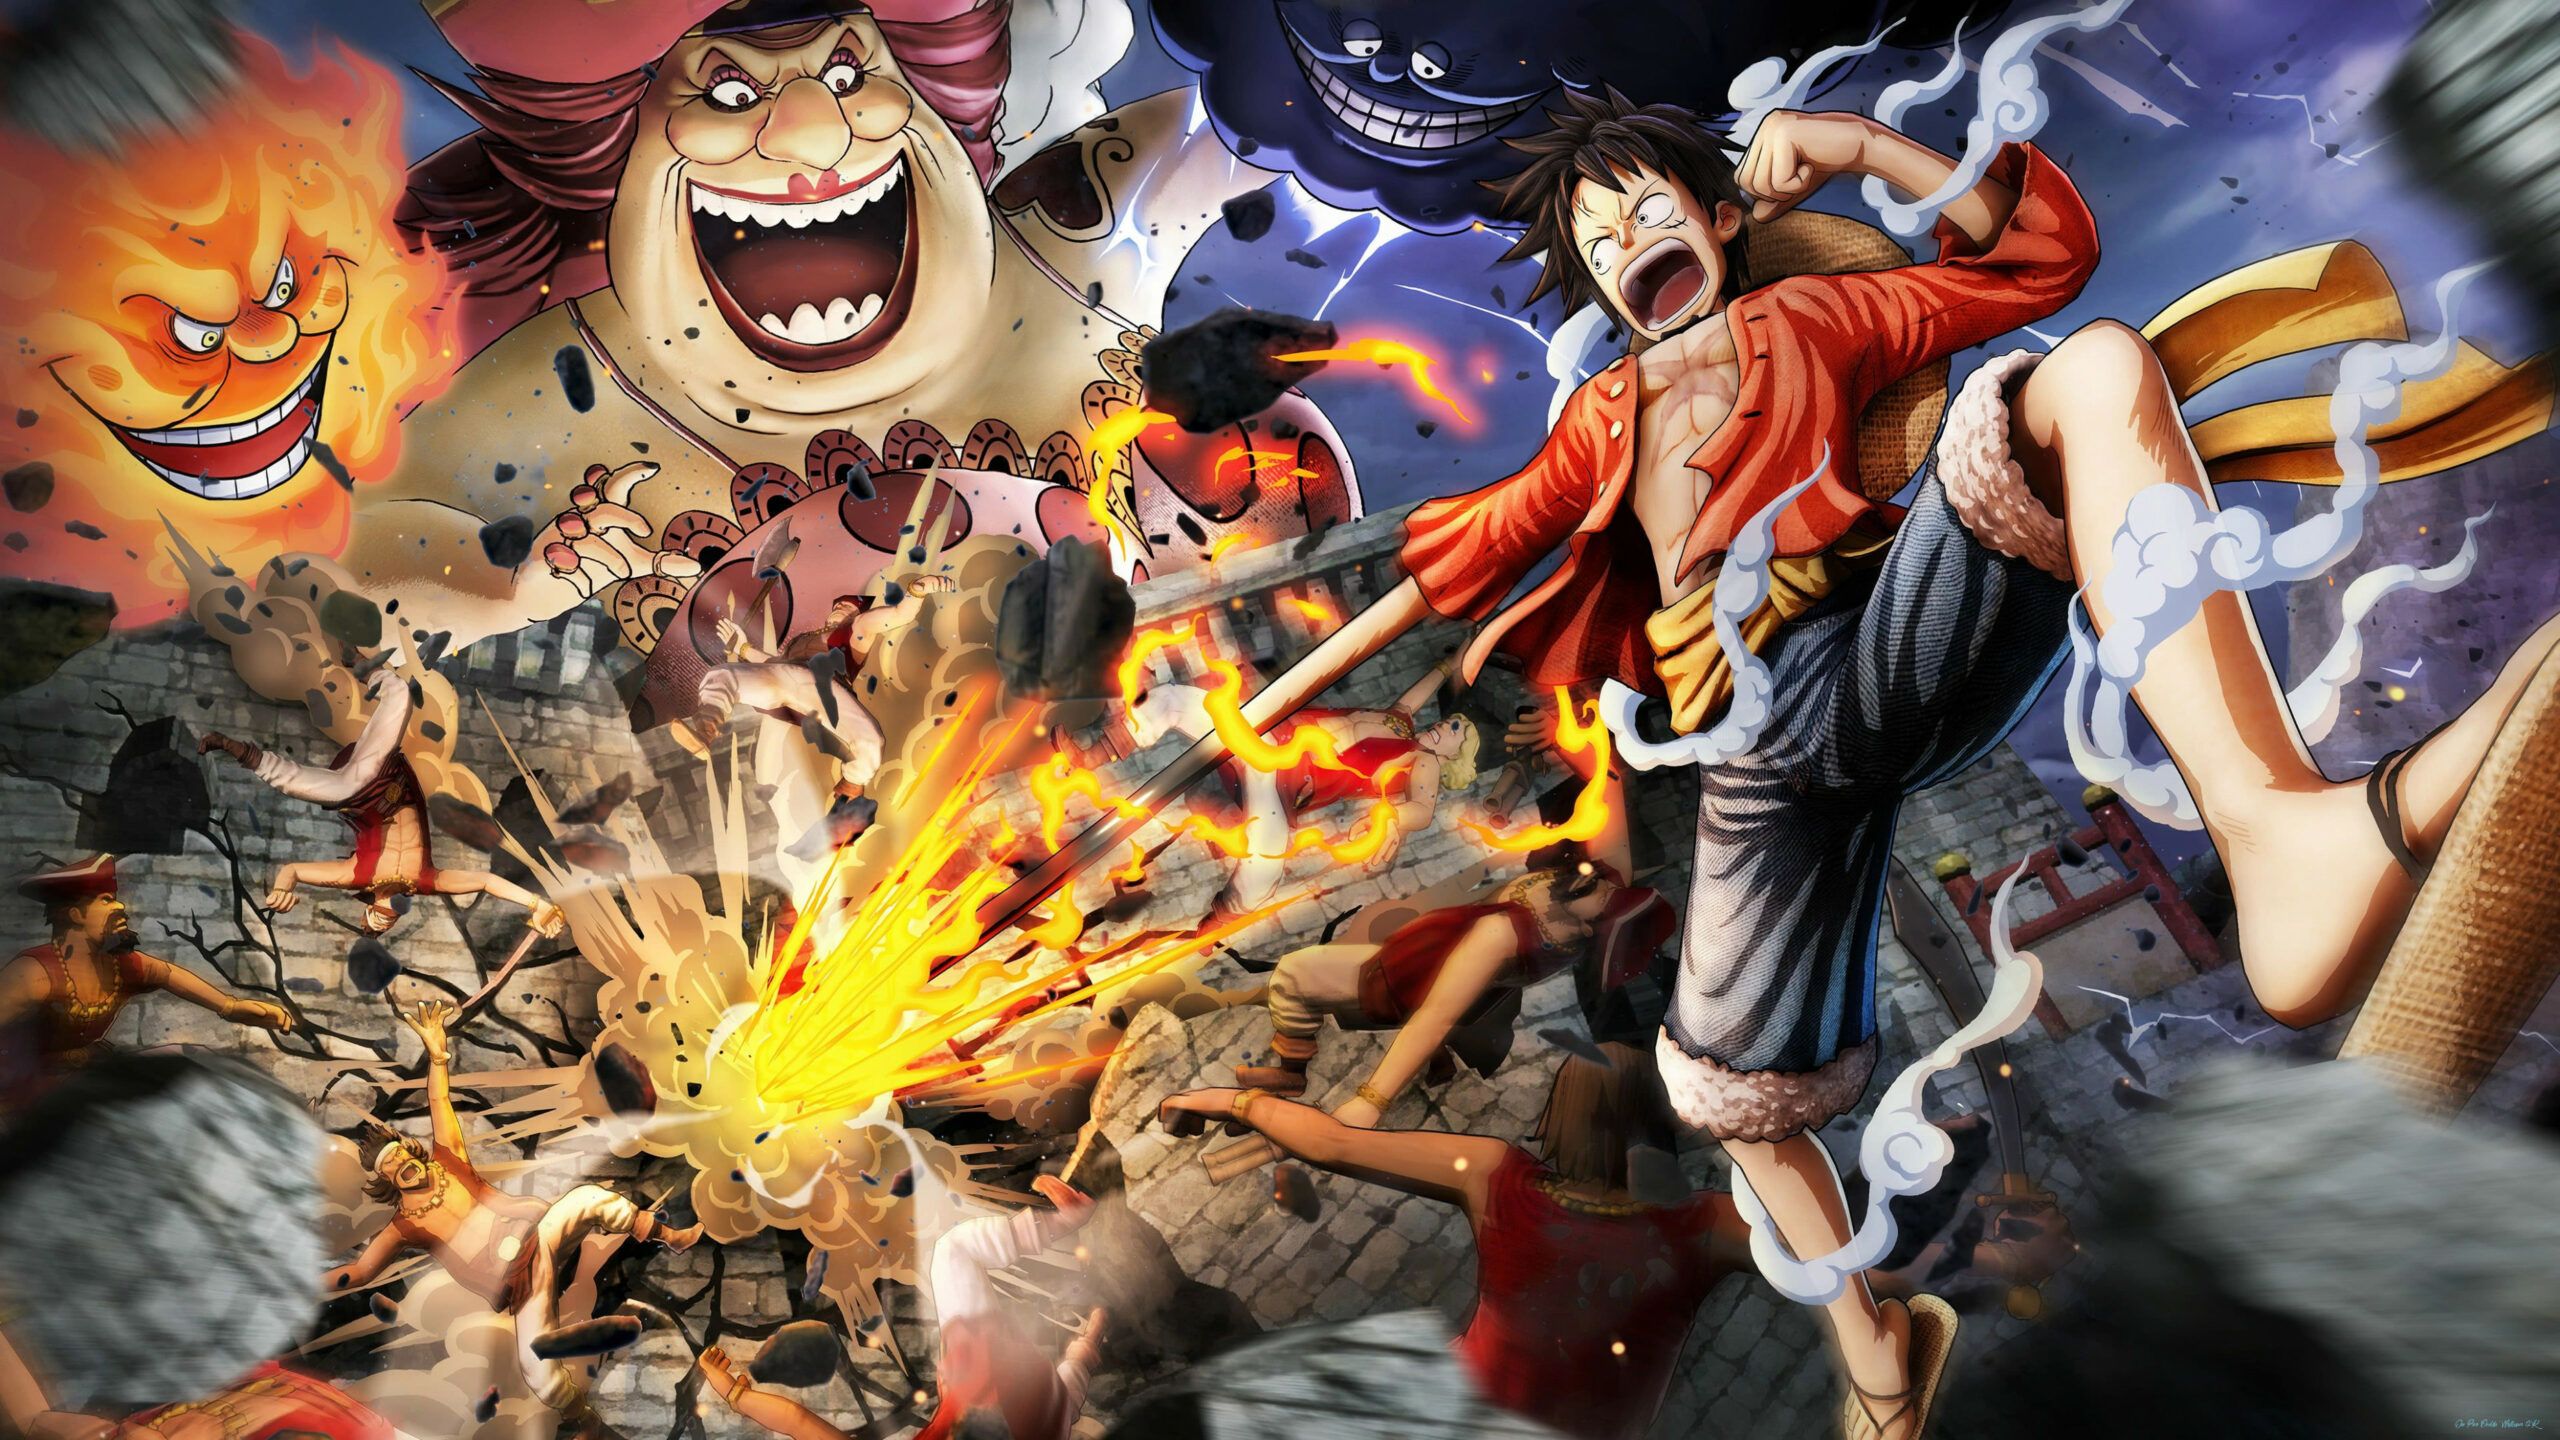 Ten Ways On How To Get The Most From This One Piece Desktop